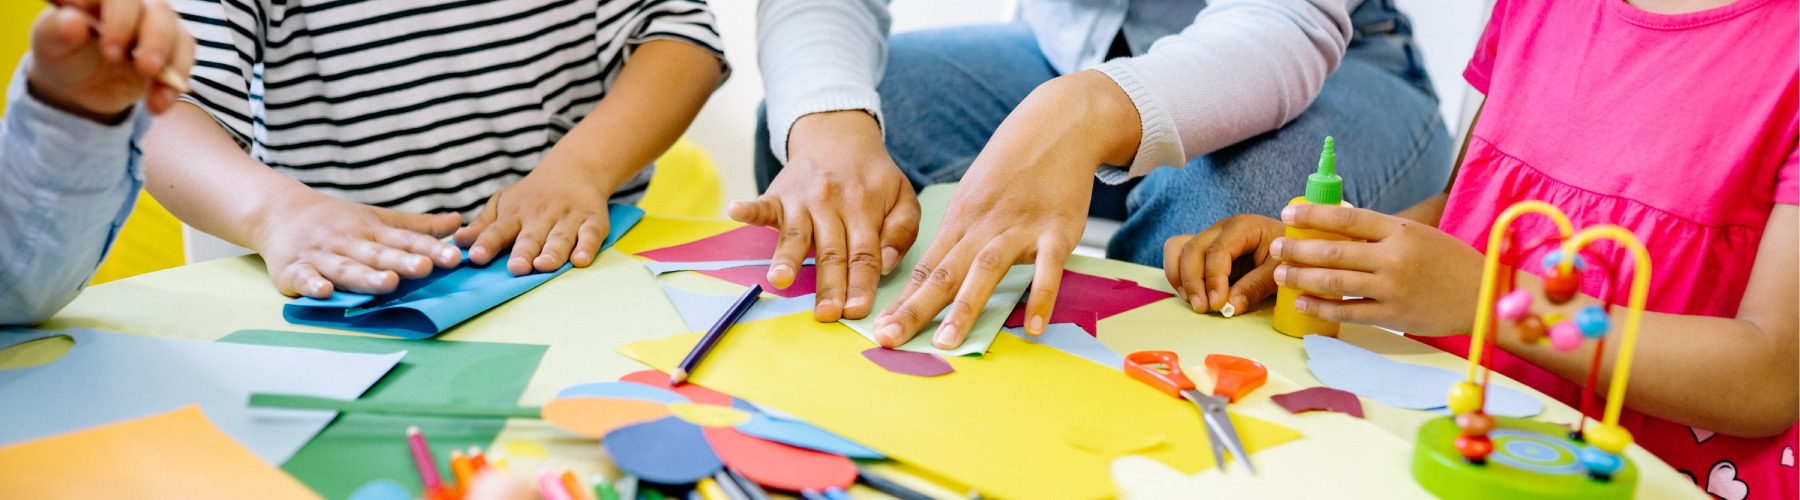 Close up of an arts and crafts table and young students folding construction paper